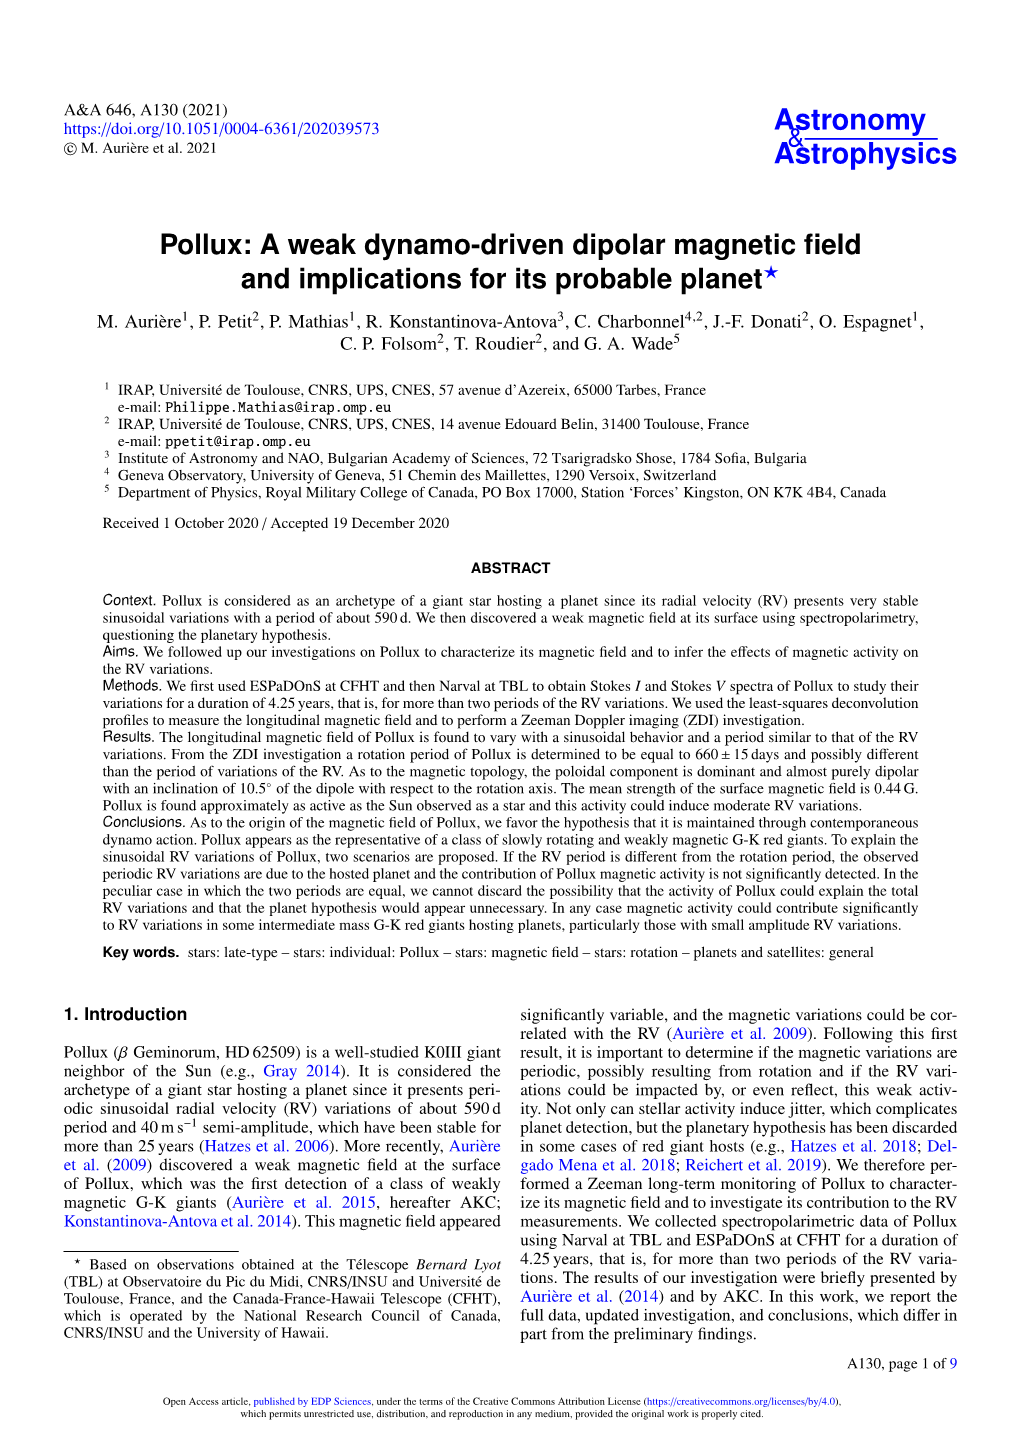 Pollux: a Weak Dynamo-Driven Dipolar Magnetic Field and Implications For